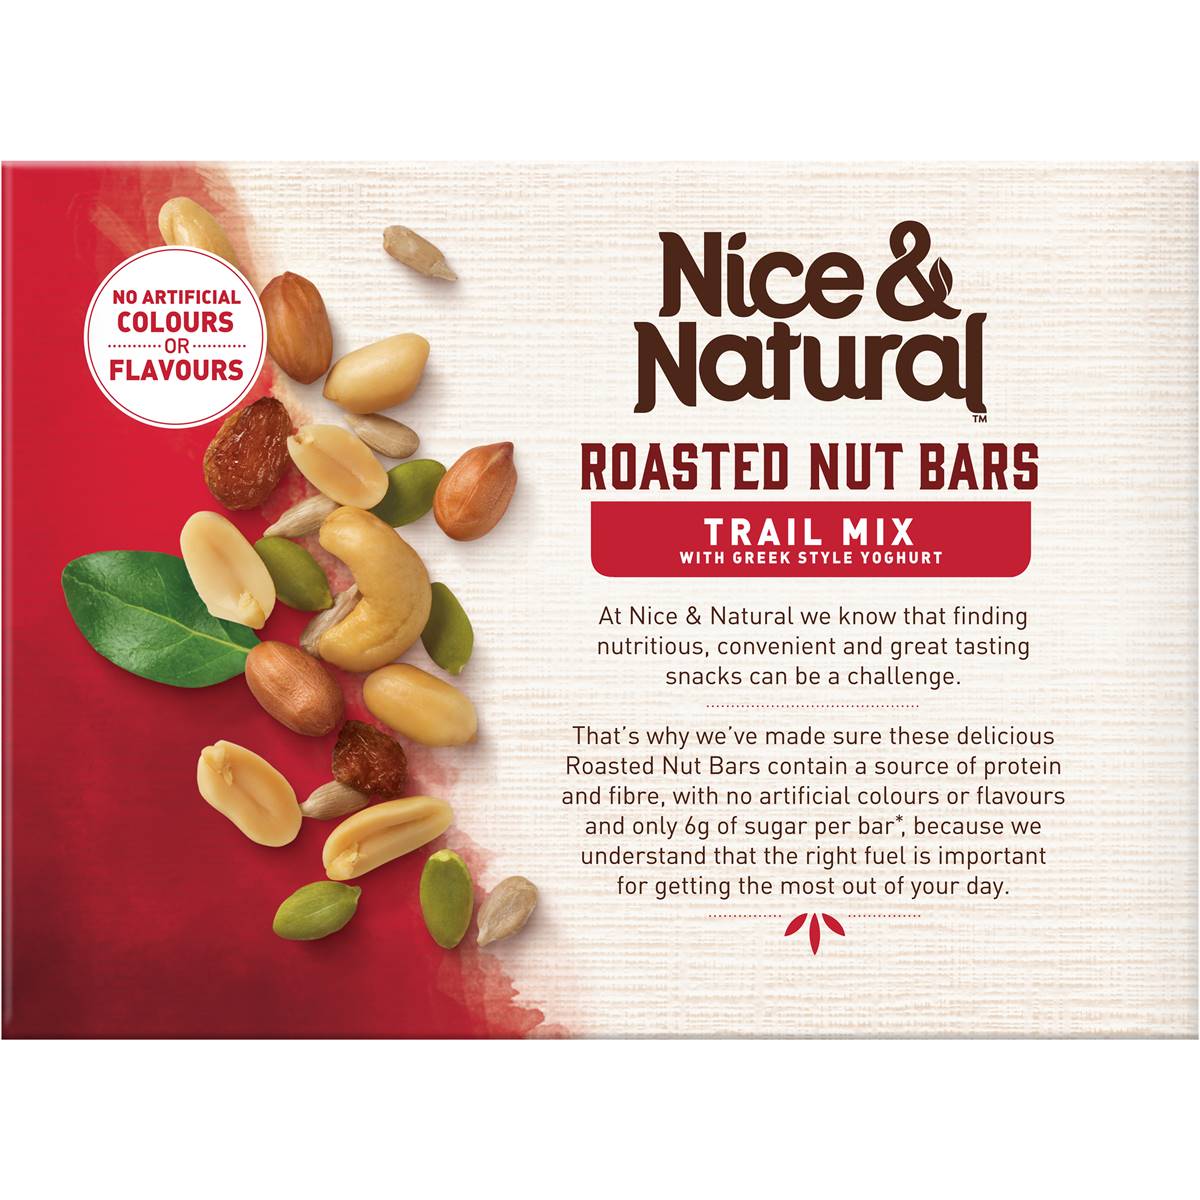 Nice & Natural Roasted Nut Bars Trail Mix 6 bars 192g